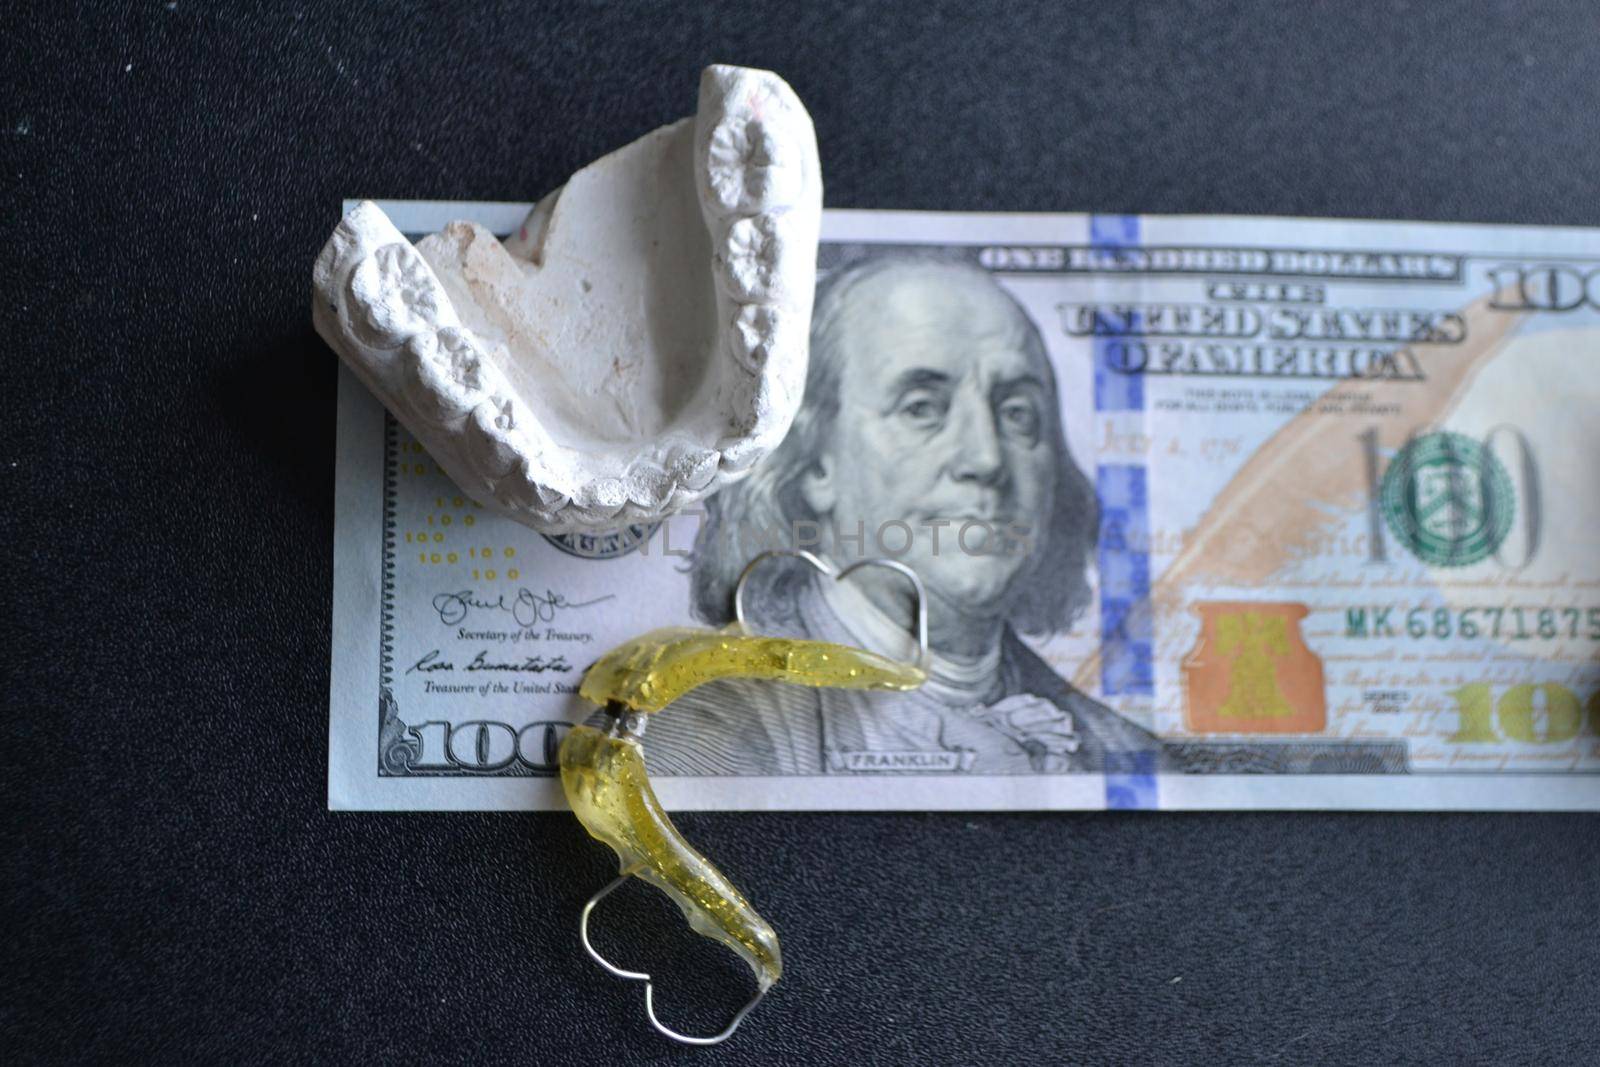 Plaster cast of teeth and dental plate on the background of money and dental x-ray. Dental examination and dental treatment concept. High quality photo